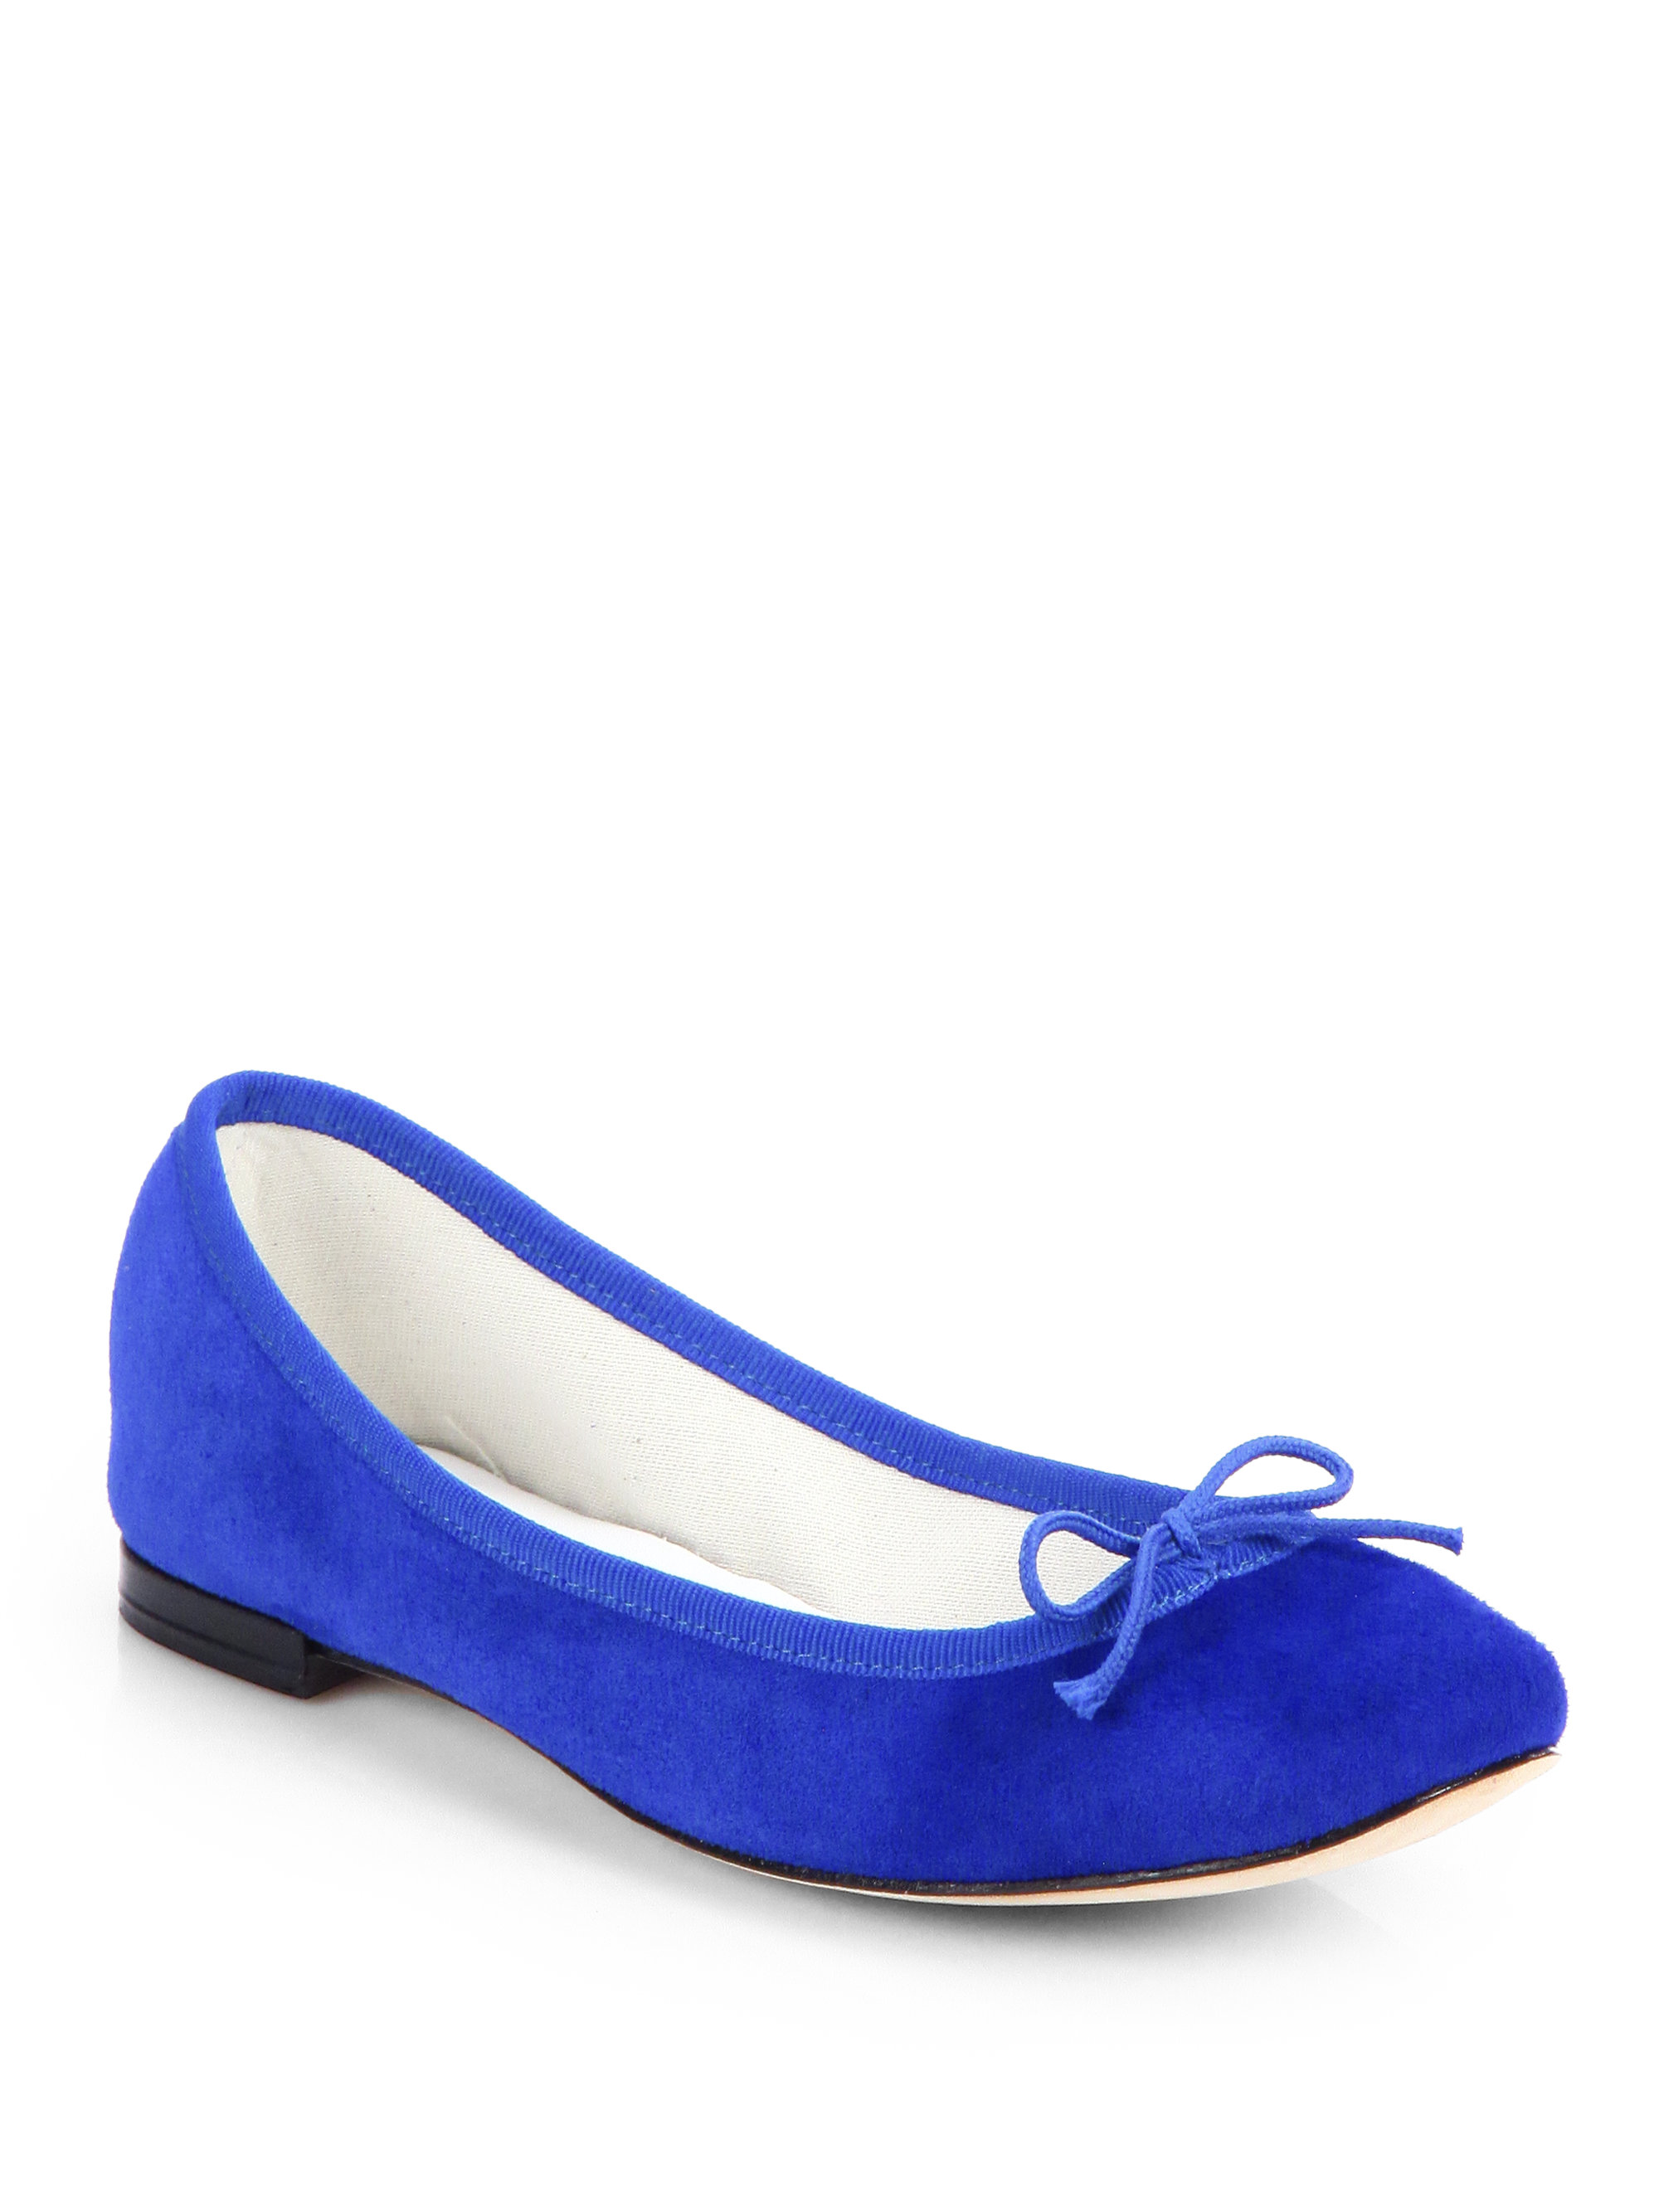 Repetto Suede Ballet Flats in Blue | Lyst